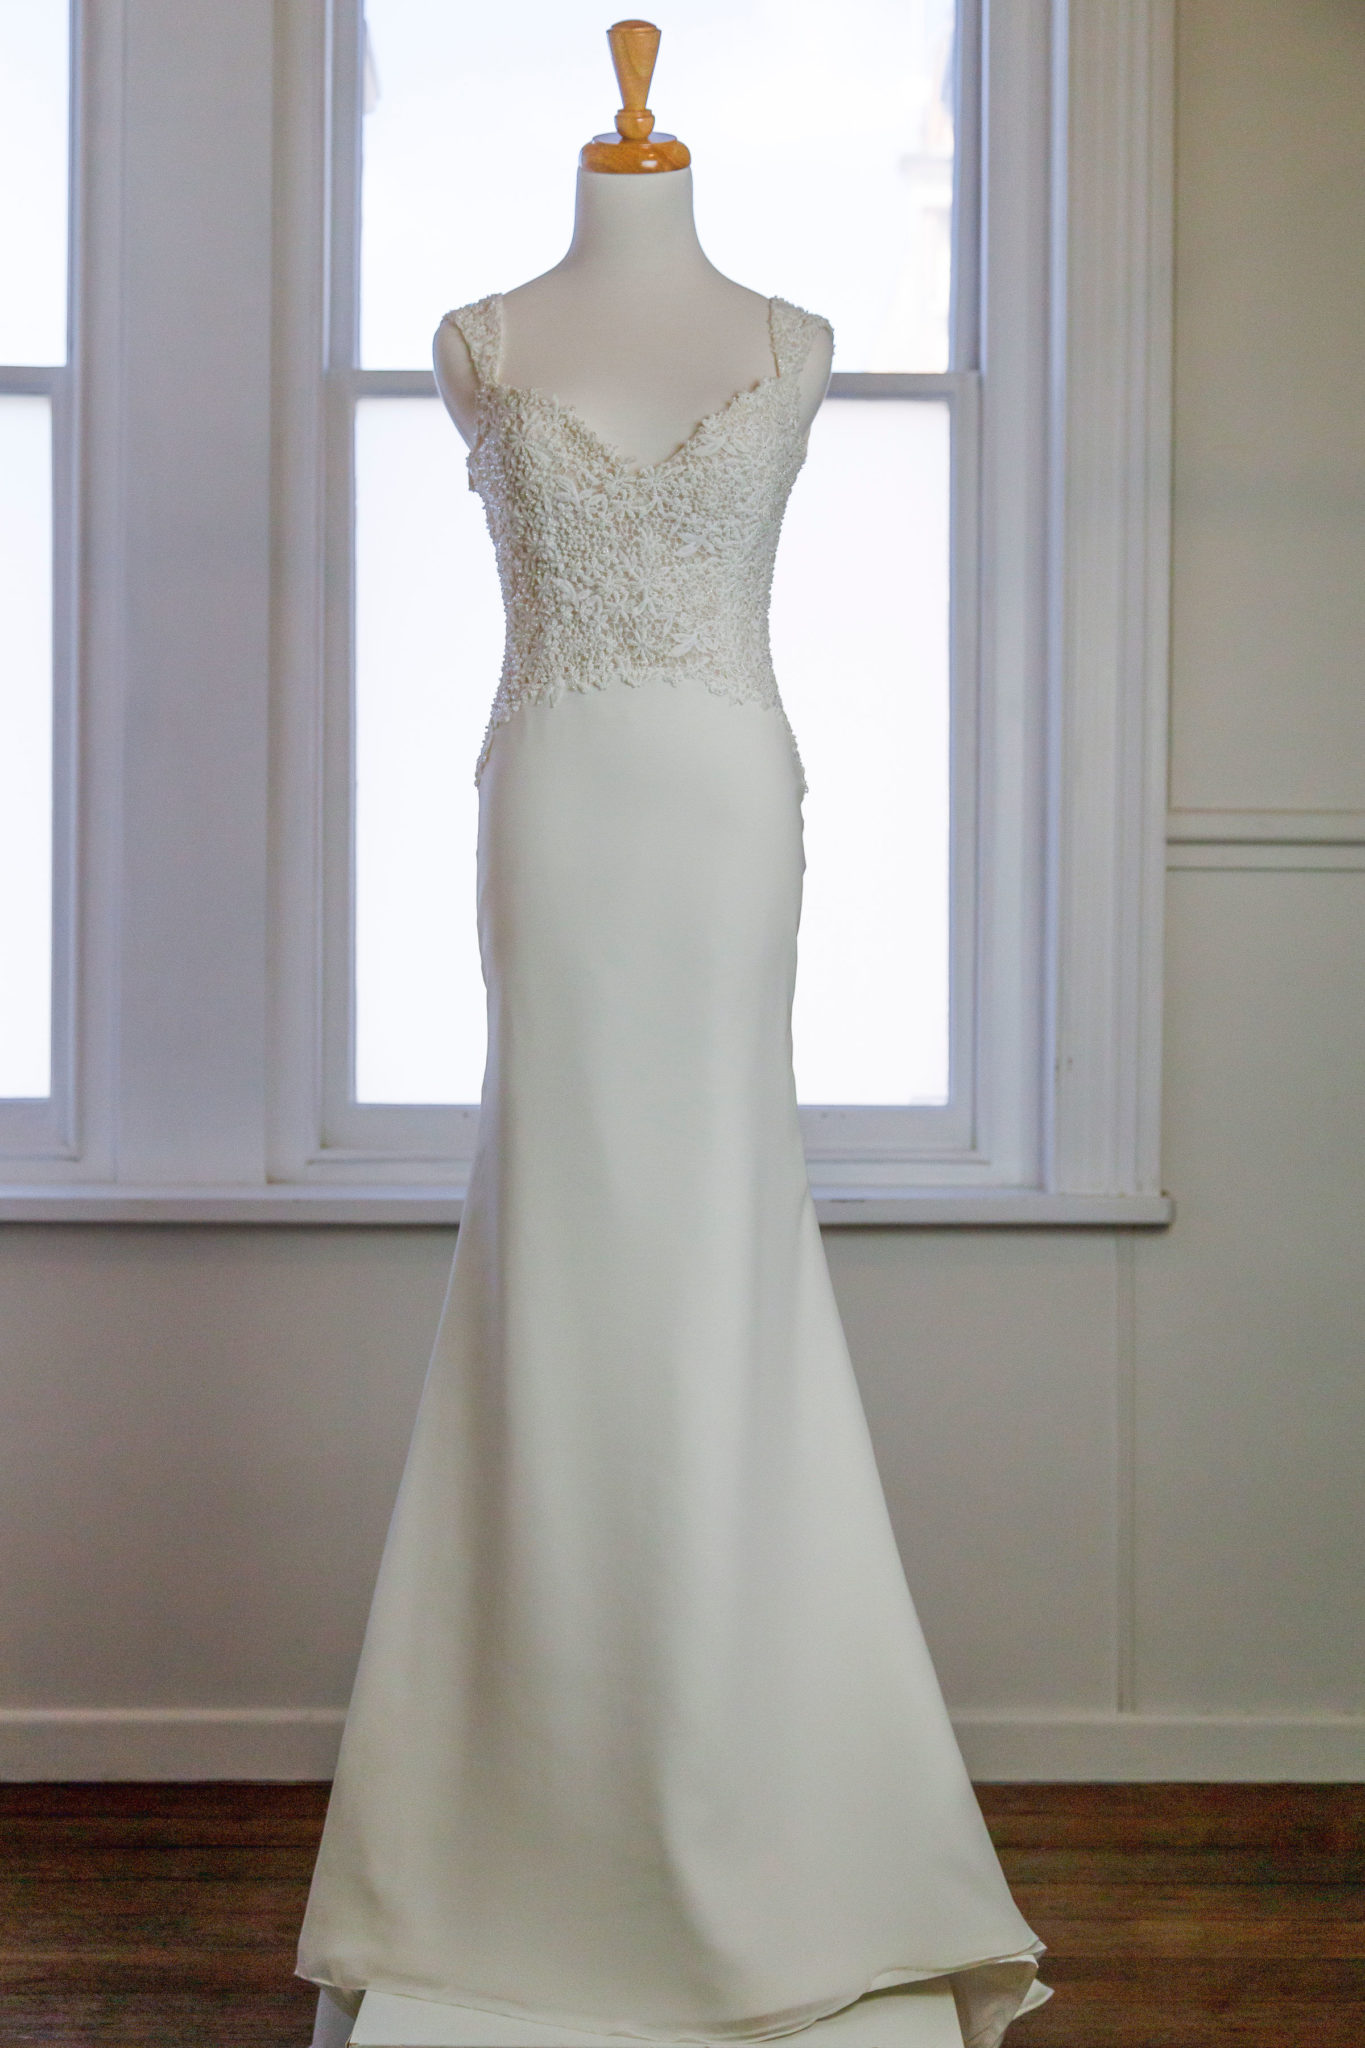 Limited Edition – Etcetera Bridal